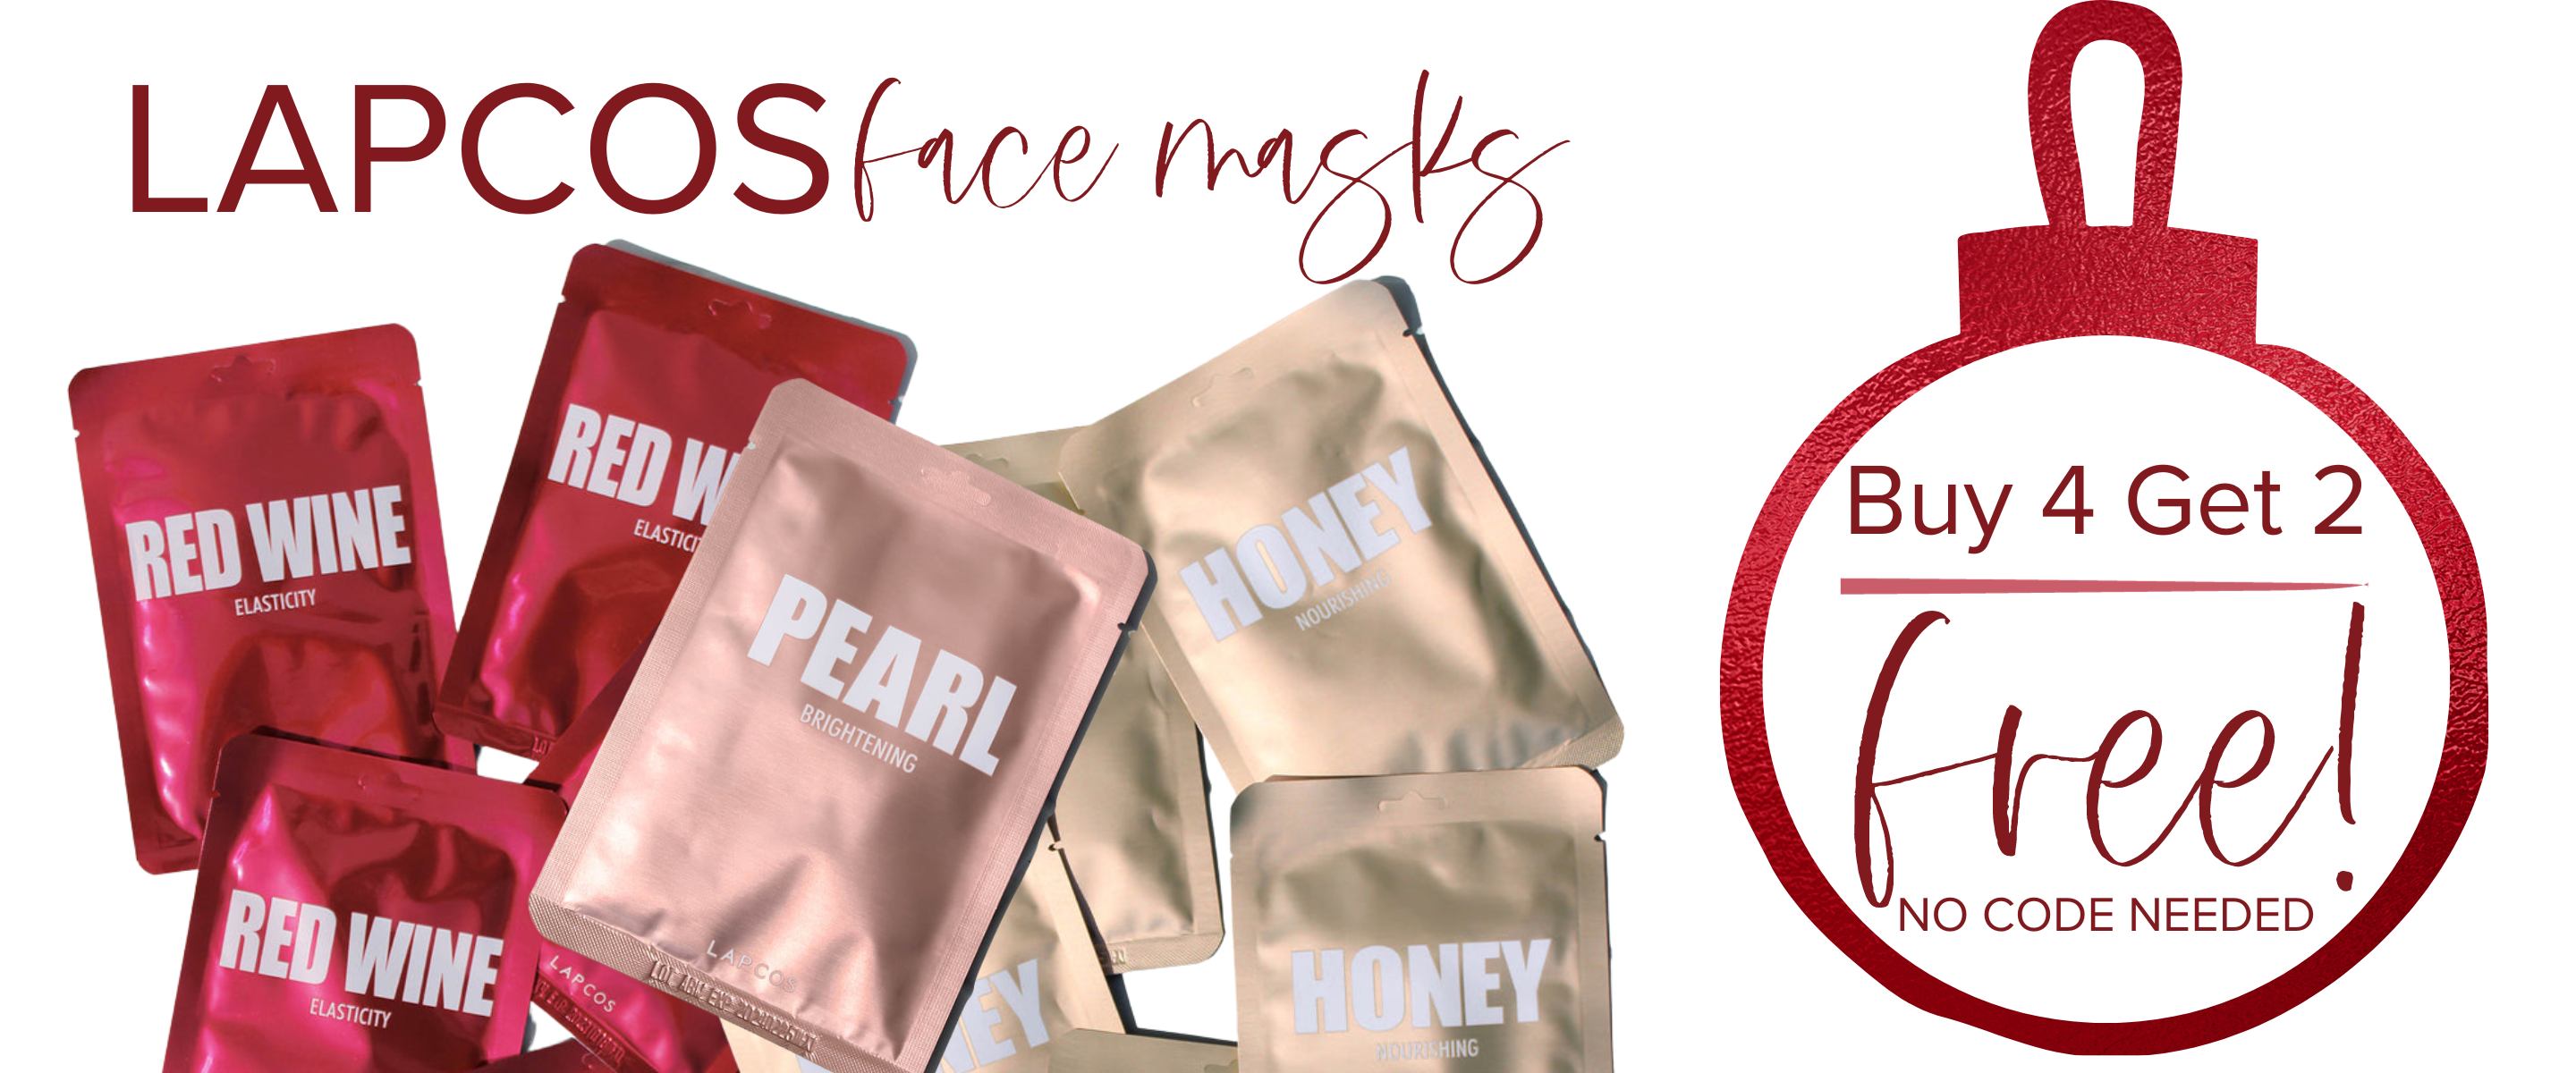 Lapco Face Masks Buy 4 get 2 free | Vixen Collection | Seattle, WA | Holiday Sales